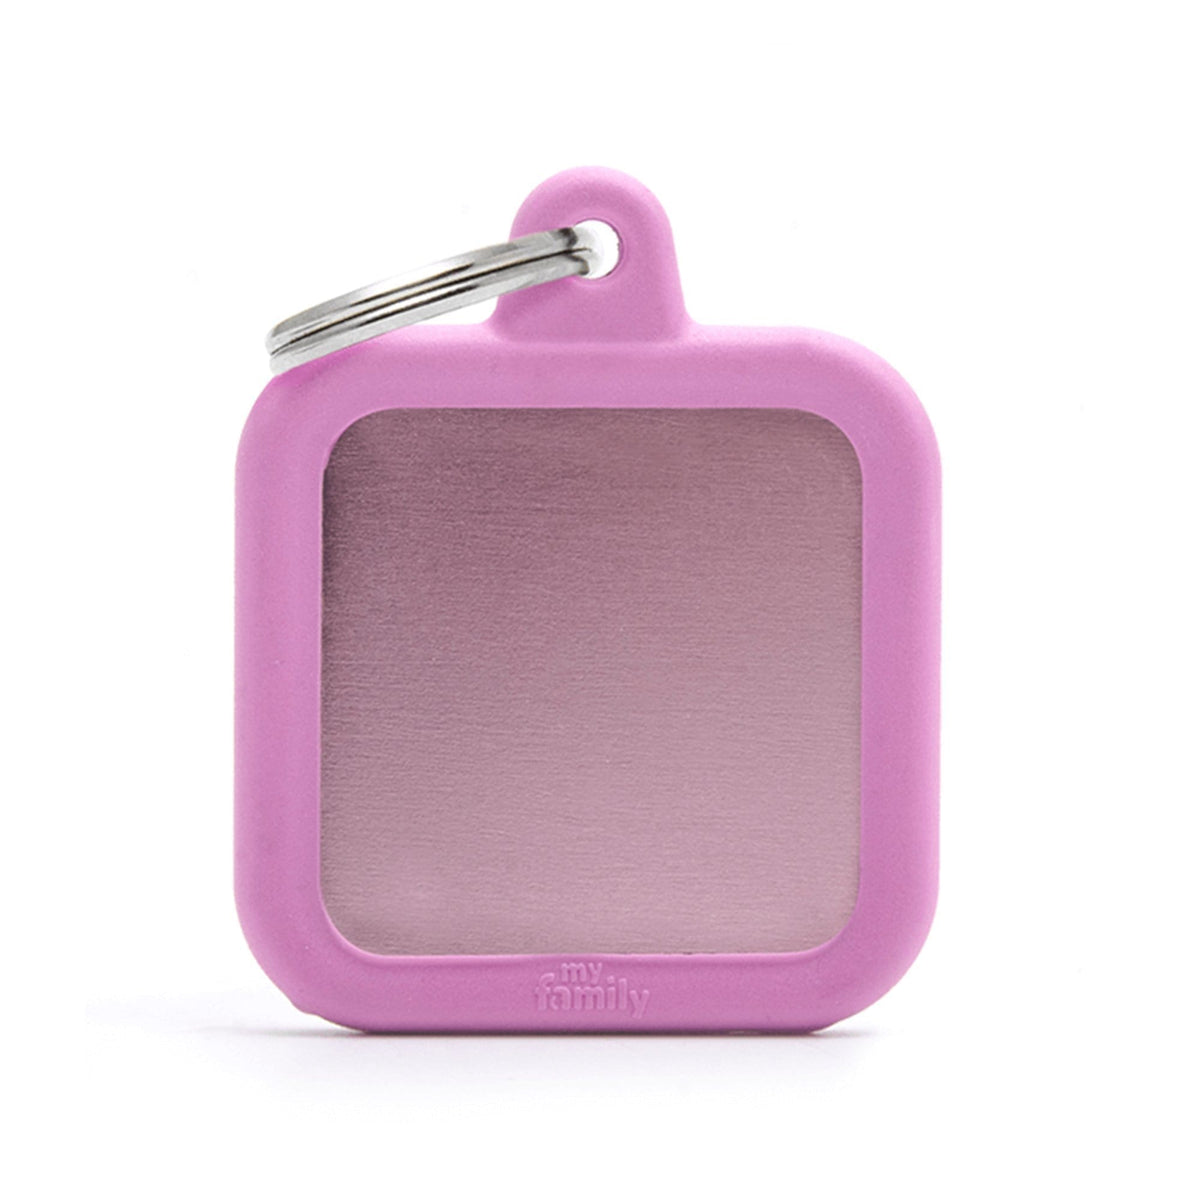 My Family Aluminium Pink Square With Rubber Dog I.D. Tags 3F3B